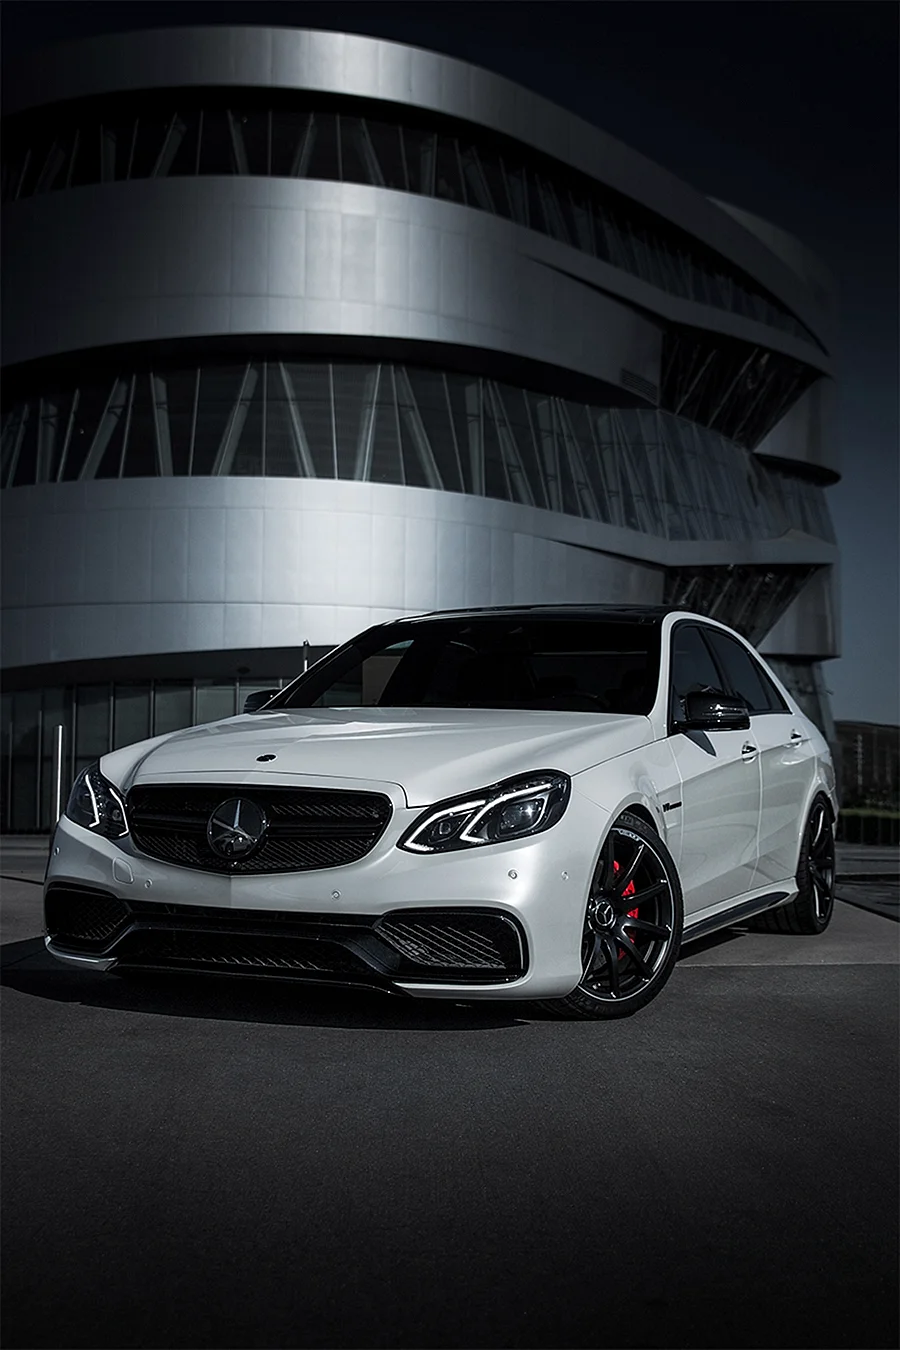 Mercedes Benz E63s Amg Wallpaper For iPhone